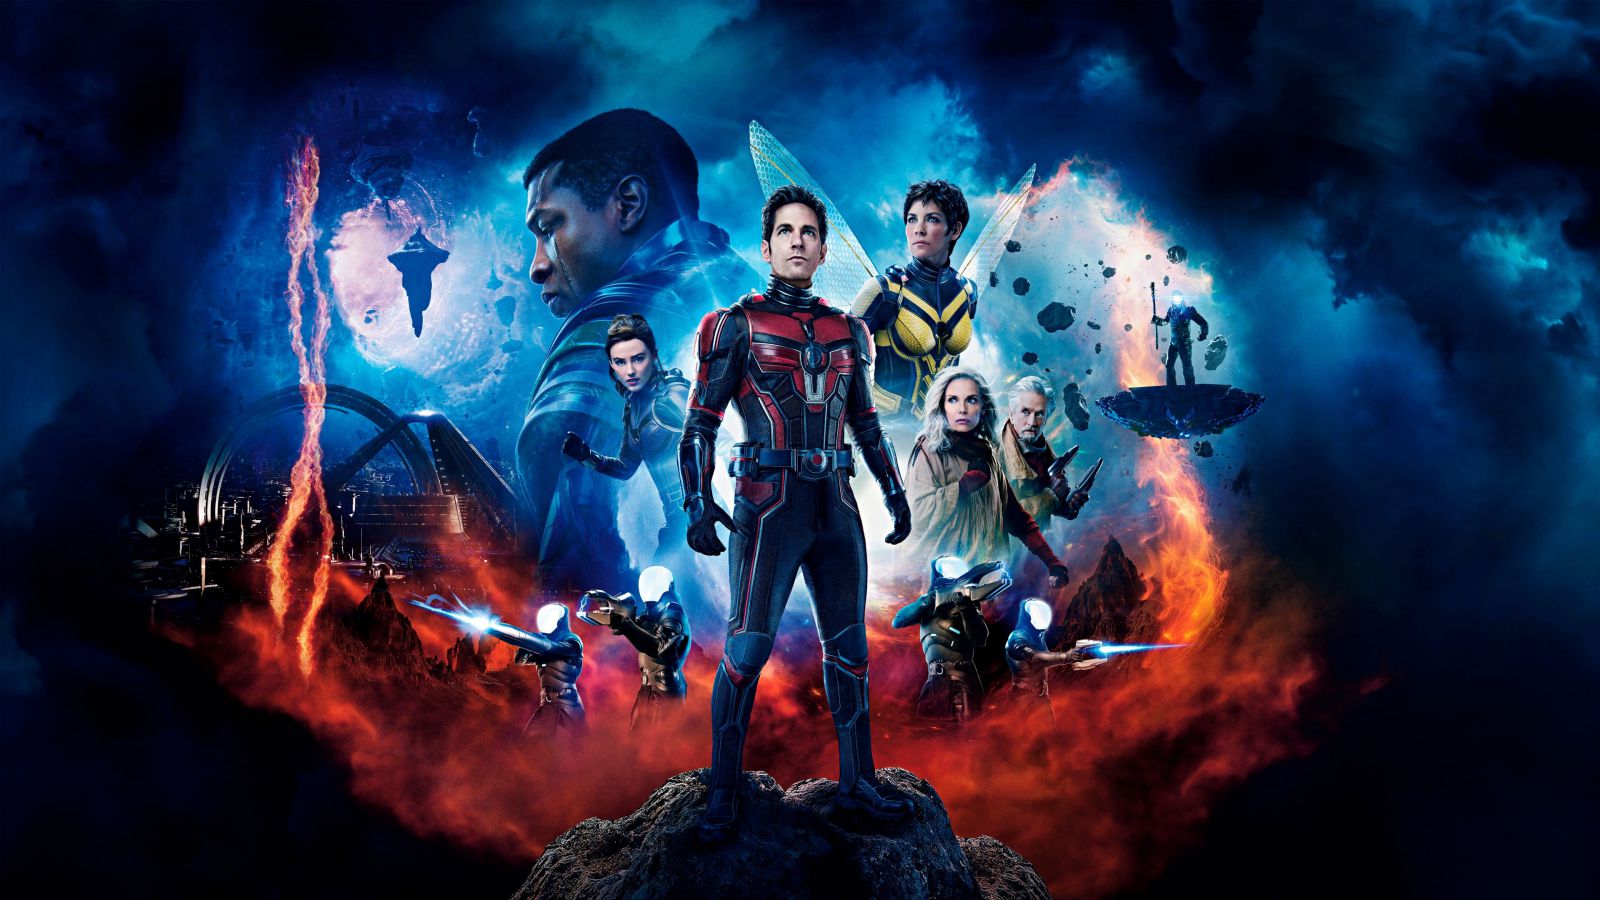 Ant-Man and the Wasp Quantumania 2023, Ant-Man and the Wasp Quantumania, Watch Ant-Man and the Wasp Quantumania full movie free online, Watch Ant-Man and the Wasp Quantumania 2023 full movie free online, Watch movie Ant-Man and the Wasp Quantumania full free online, Download movie Ant-Man and the Wasp Quantumania full HD free, Link movie Ant-Man and the Wasp Quantumania free online, Action Movies, Adventure Movies, Comedy Movies